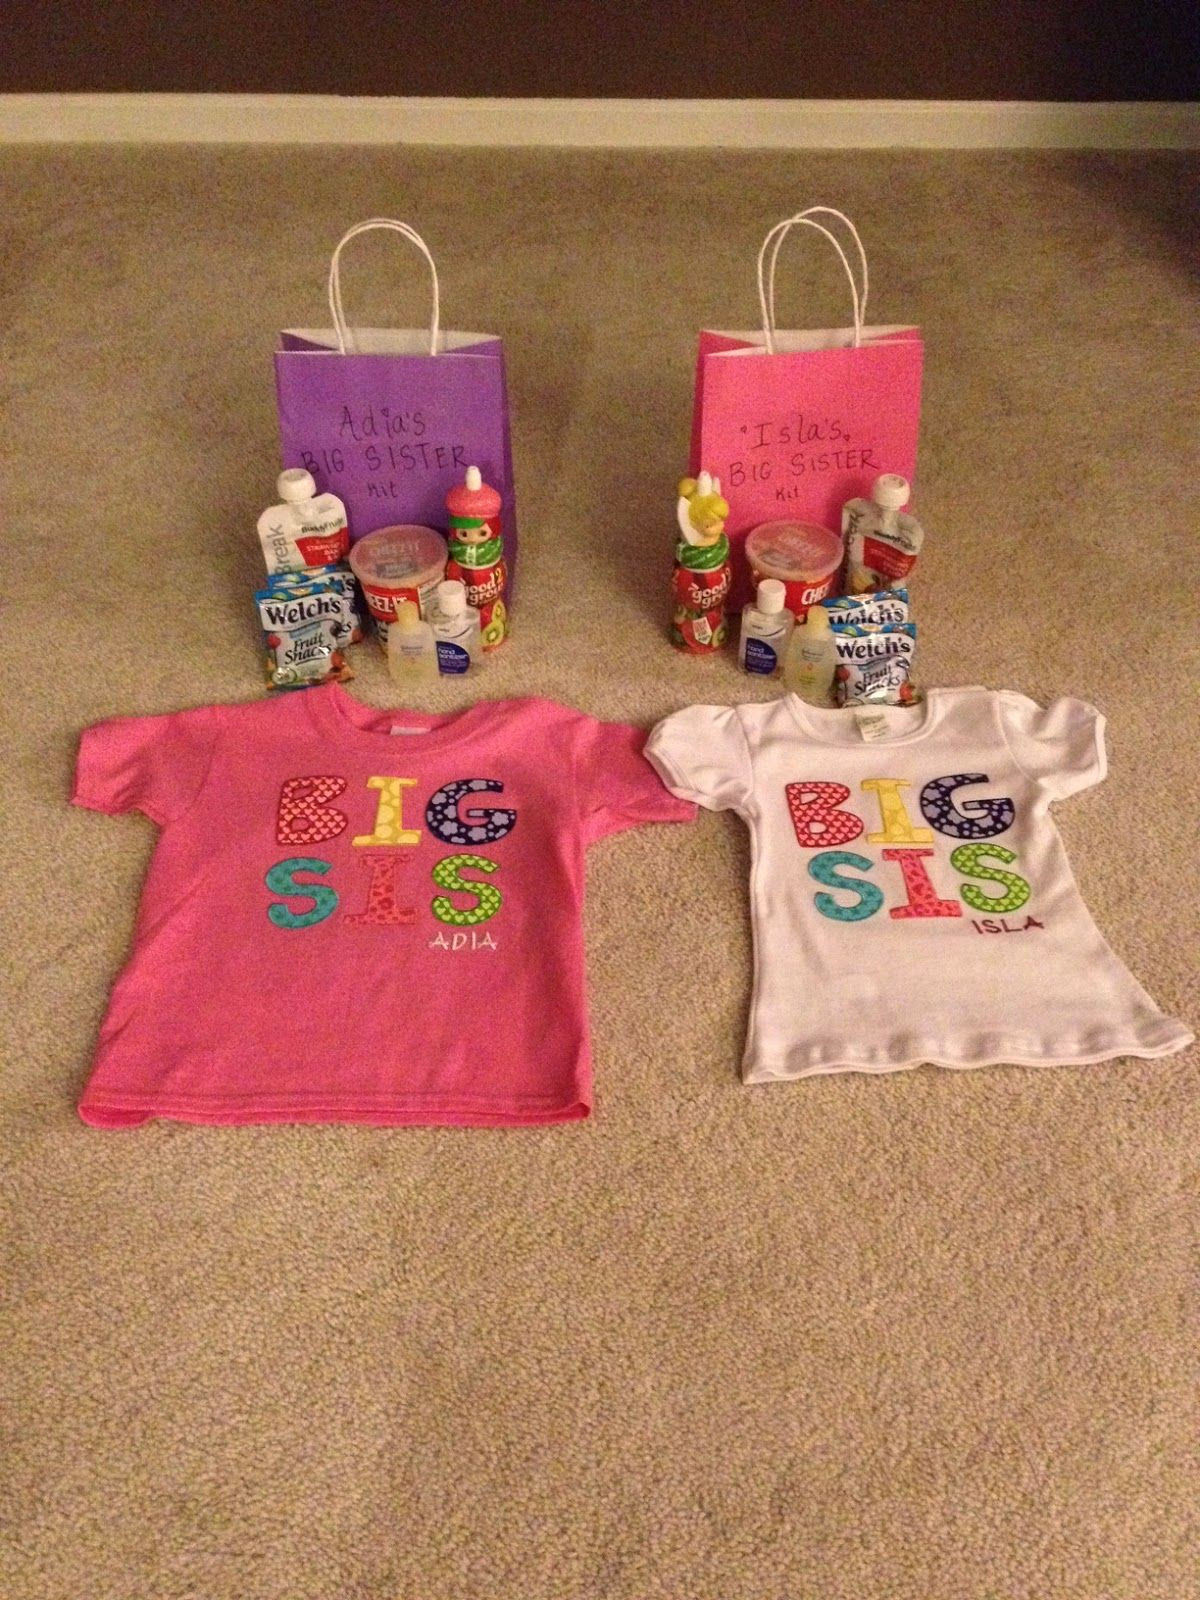 Gift Ideas For Big Brother From New Baby
 Big Sister Kit or Big Brother Kit ideas